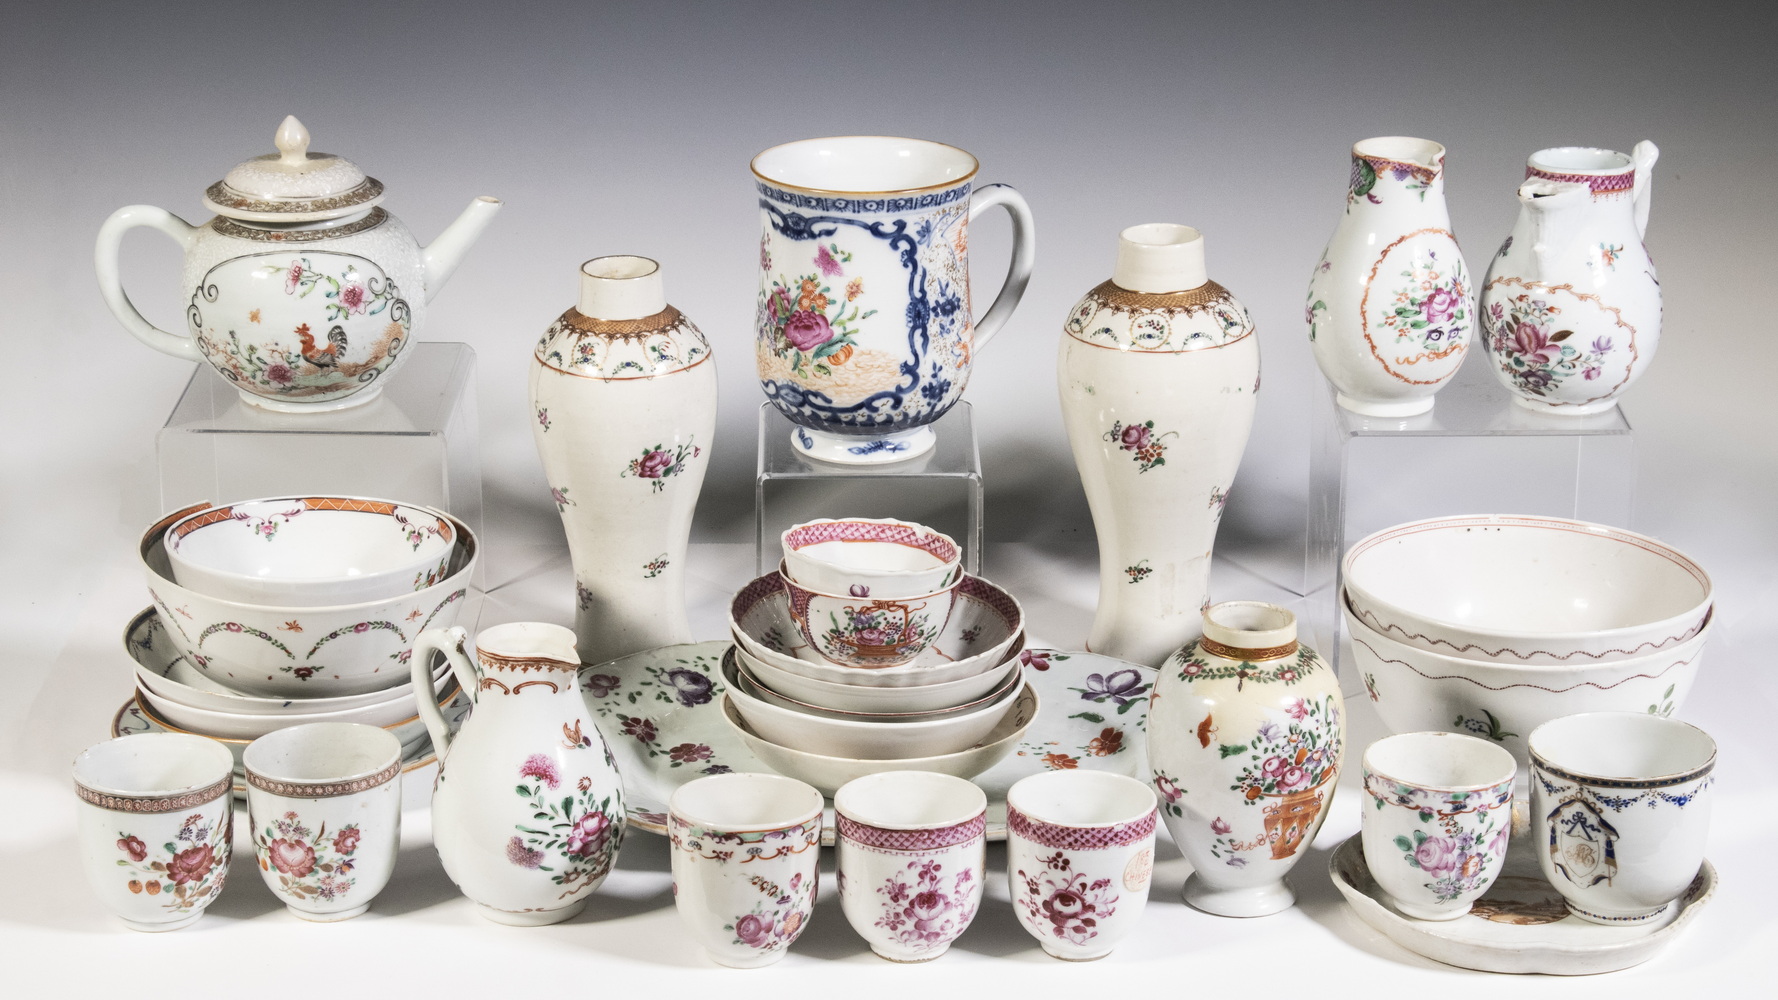 CHINESE EXPORT PORCELAIN COLLECTION 2b2c88